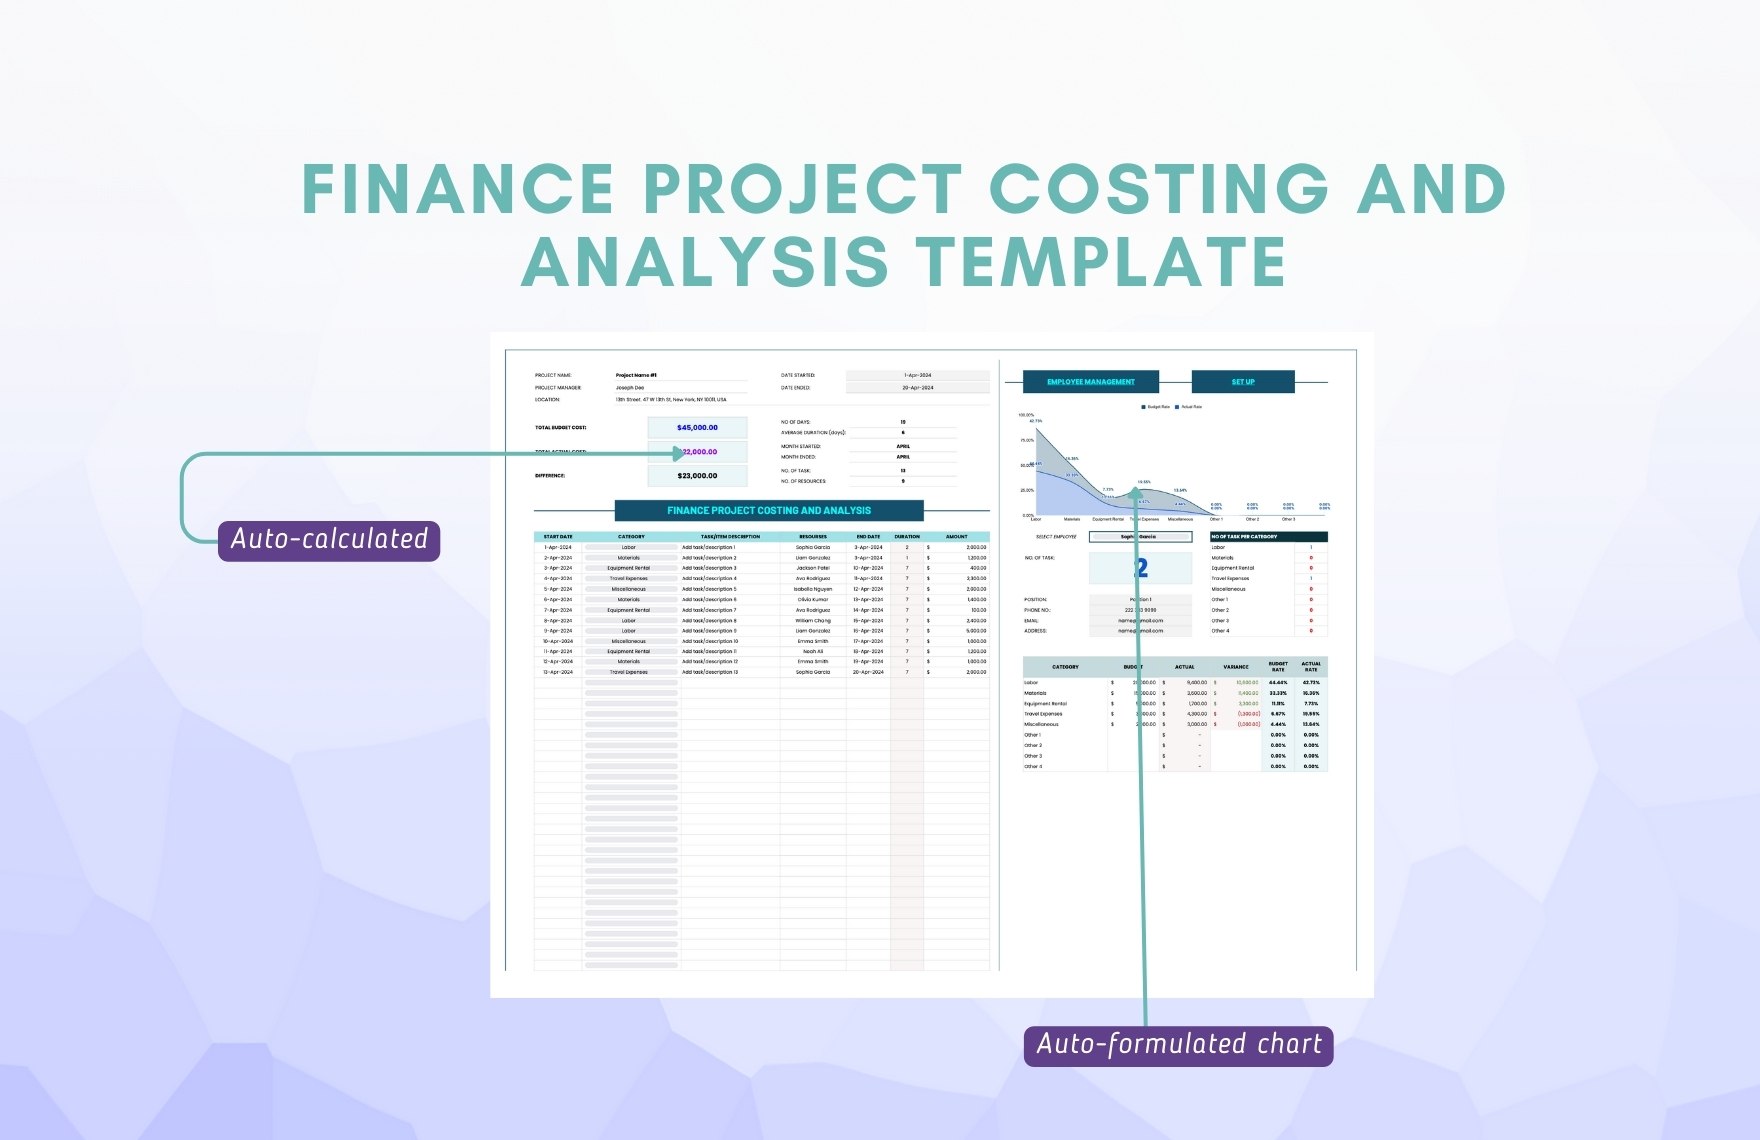 Finance Project Costing and Analysis Template